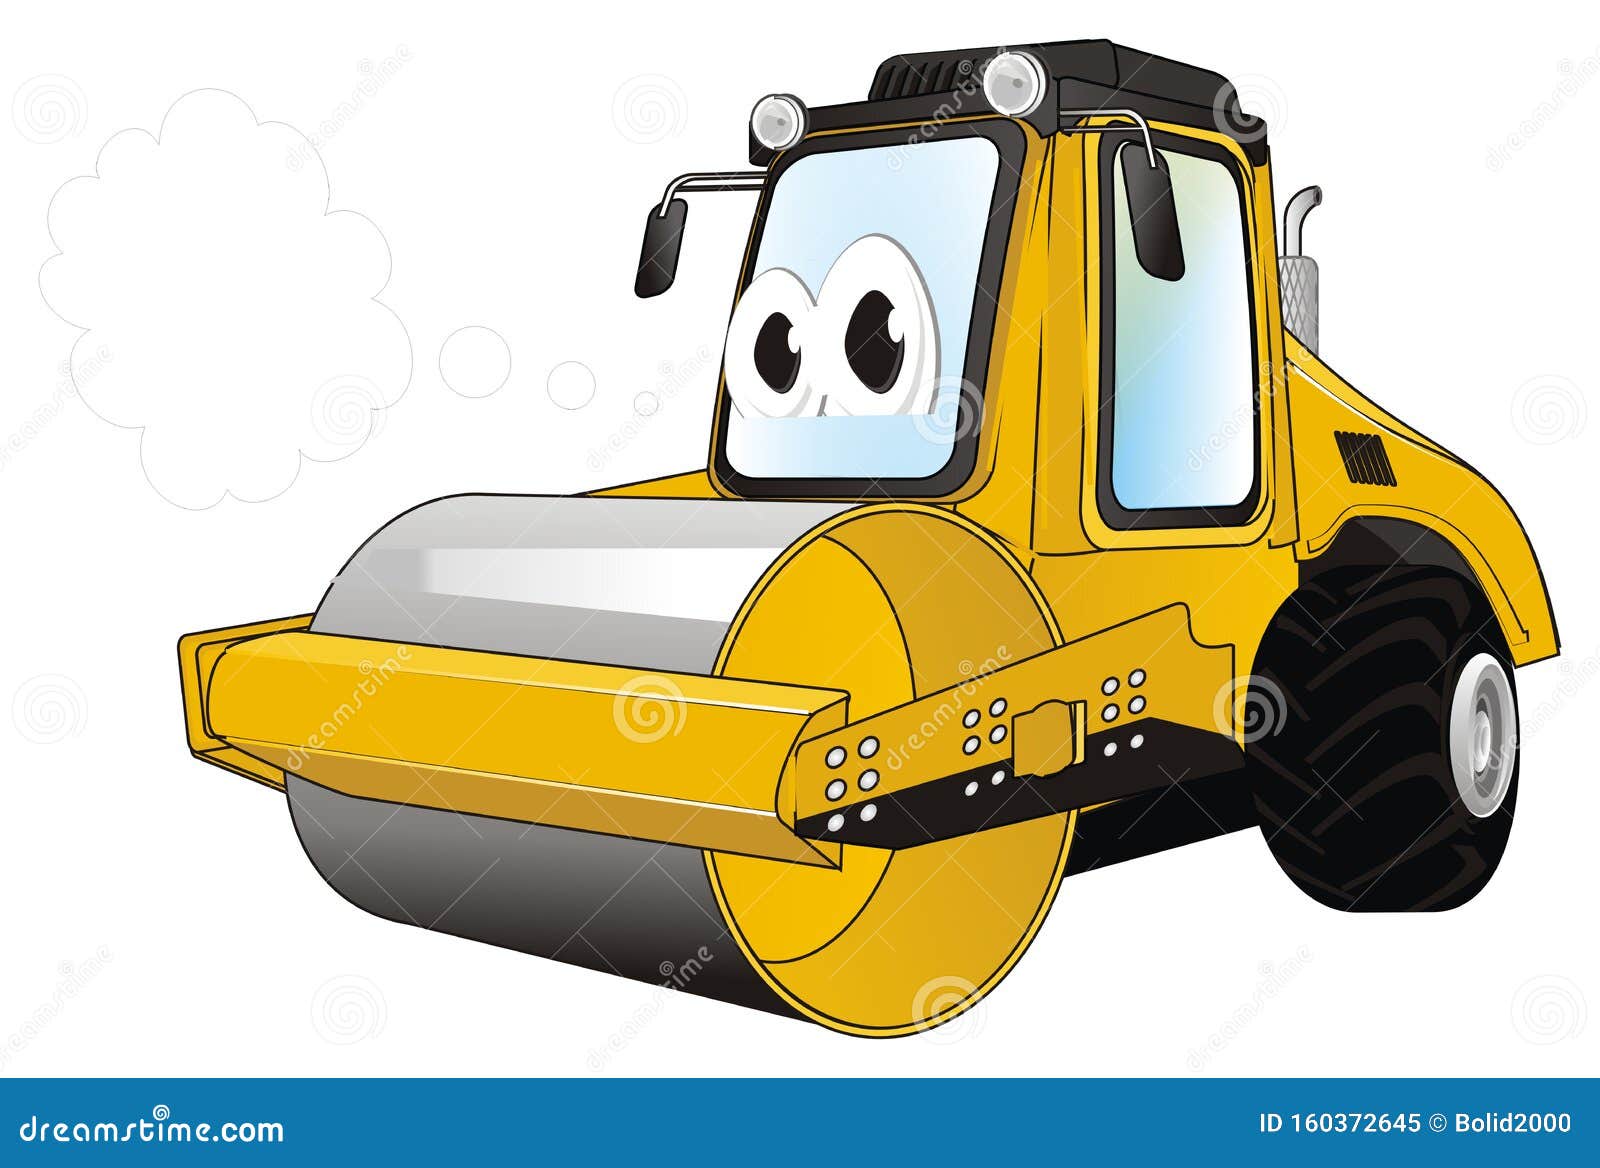 Funny Road Roller With Footnote Illustration 160372645 - Megapixl